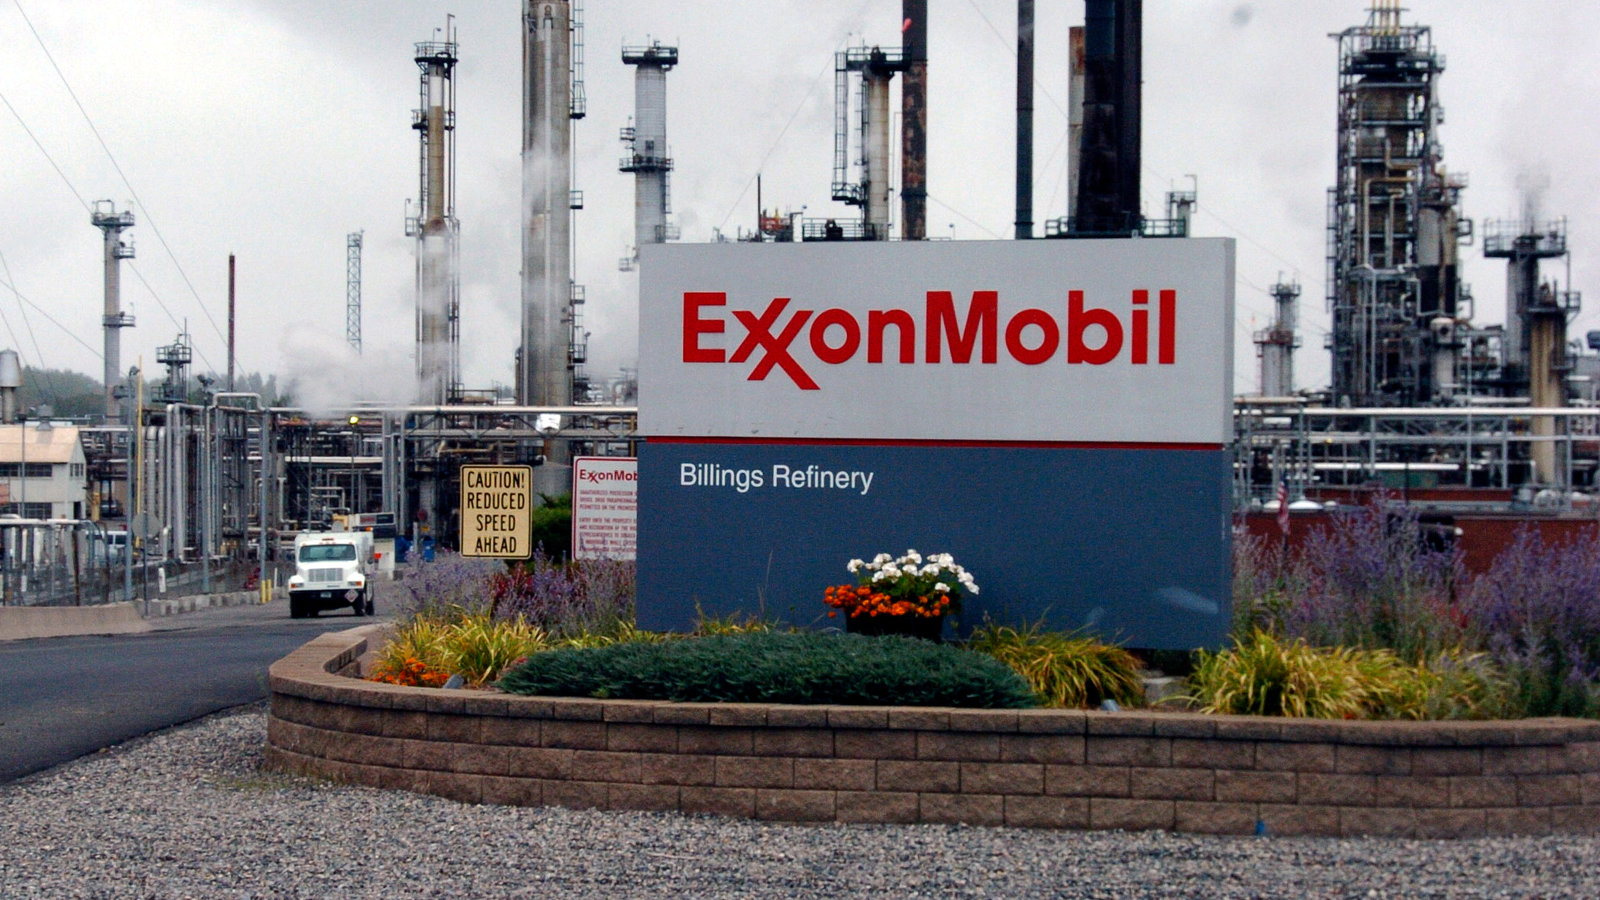 ExxonMobil Agreement Under Scrutiny As Government Fails To Comply With Law Requiring Disclosure